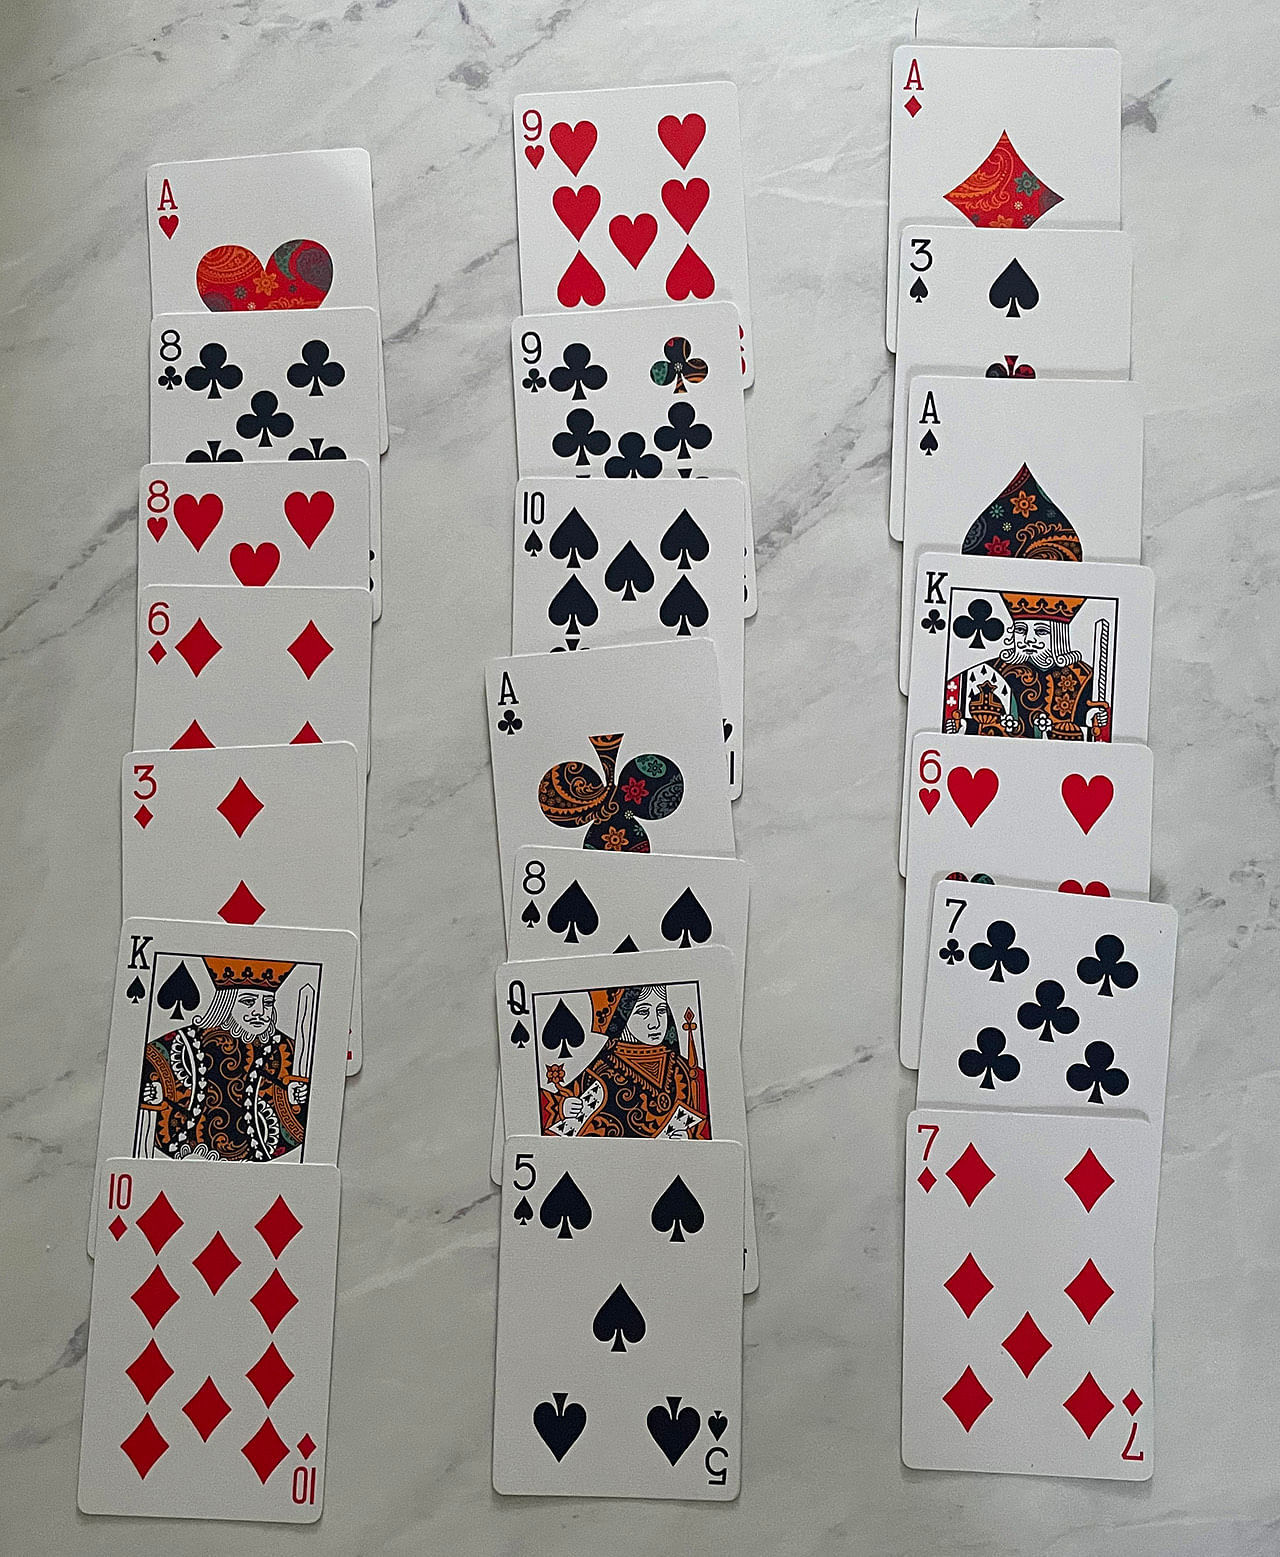 Playing cards arranged in columns for the 21 card trick